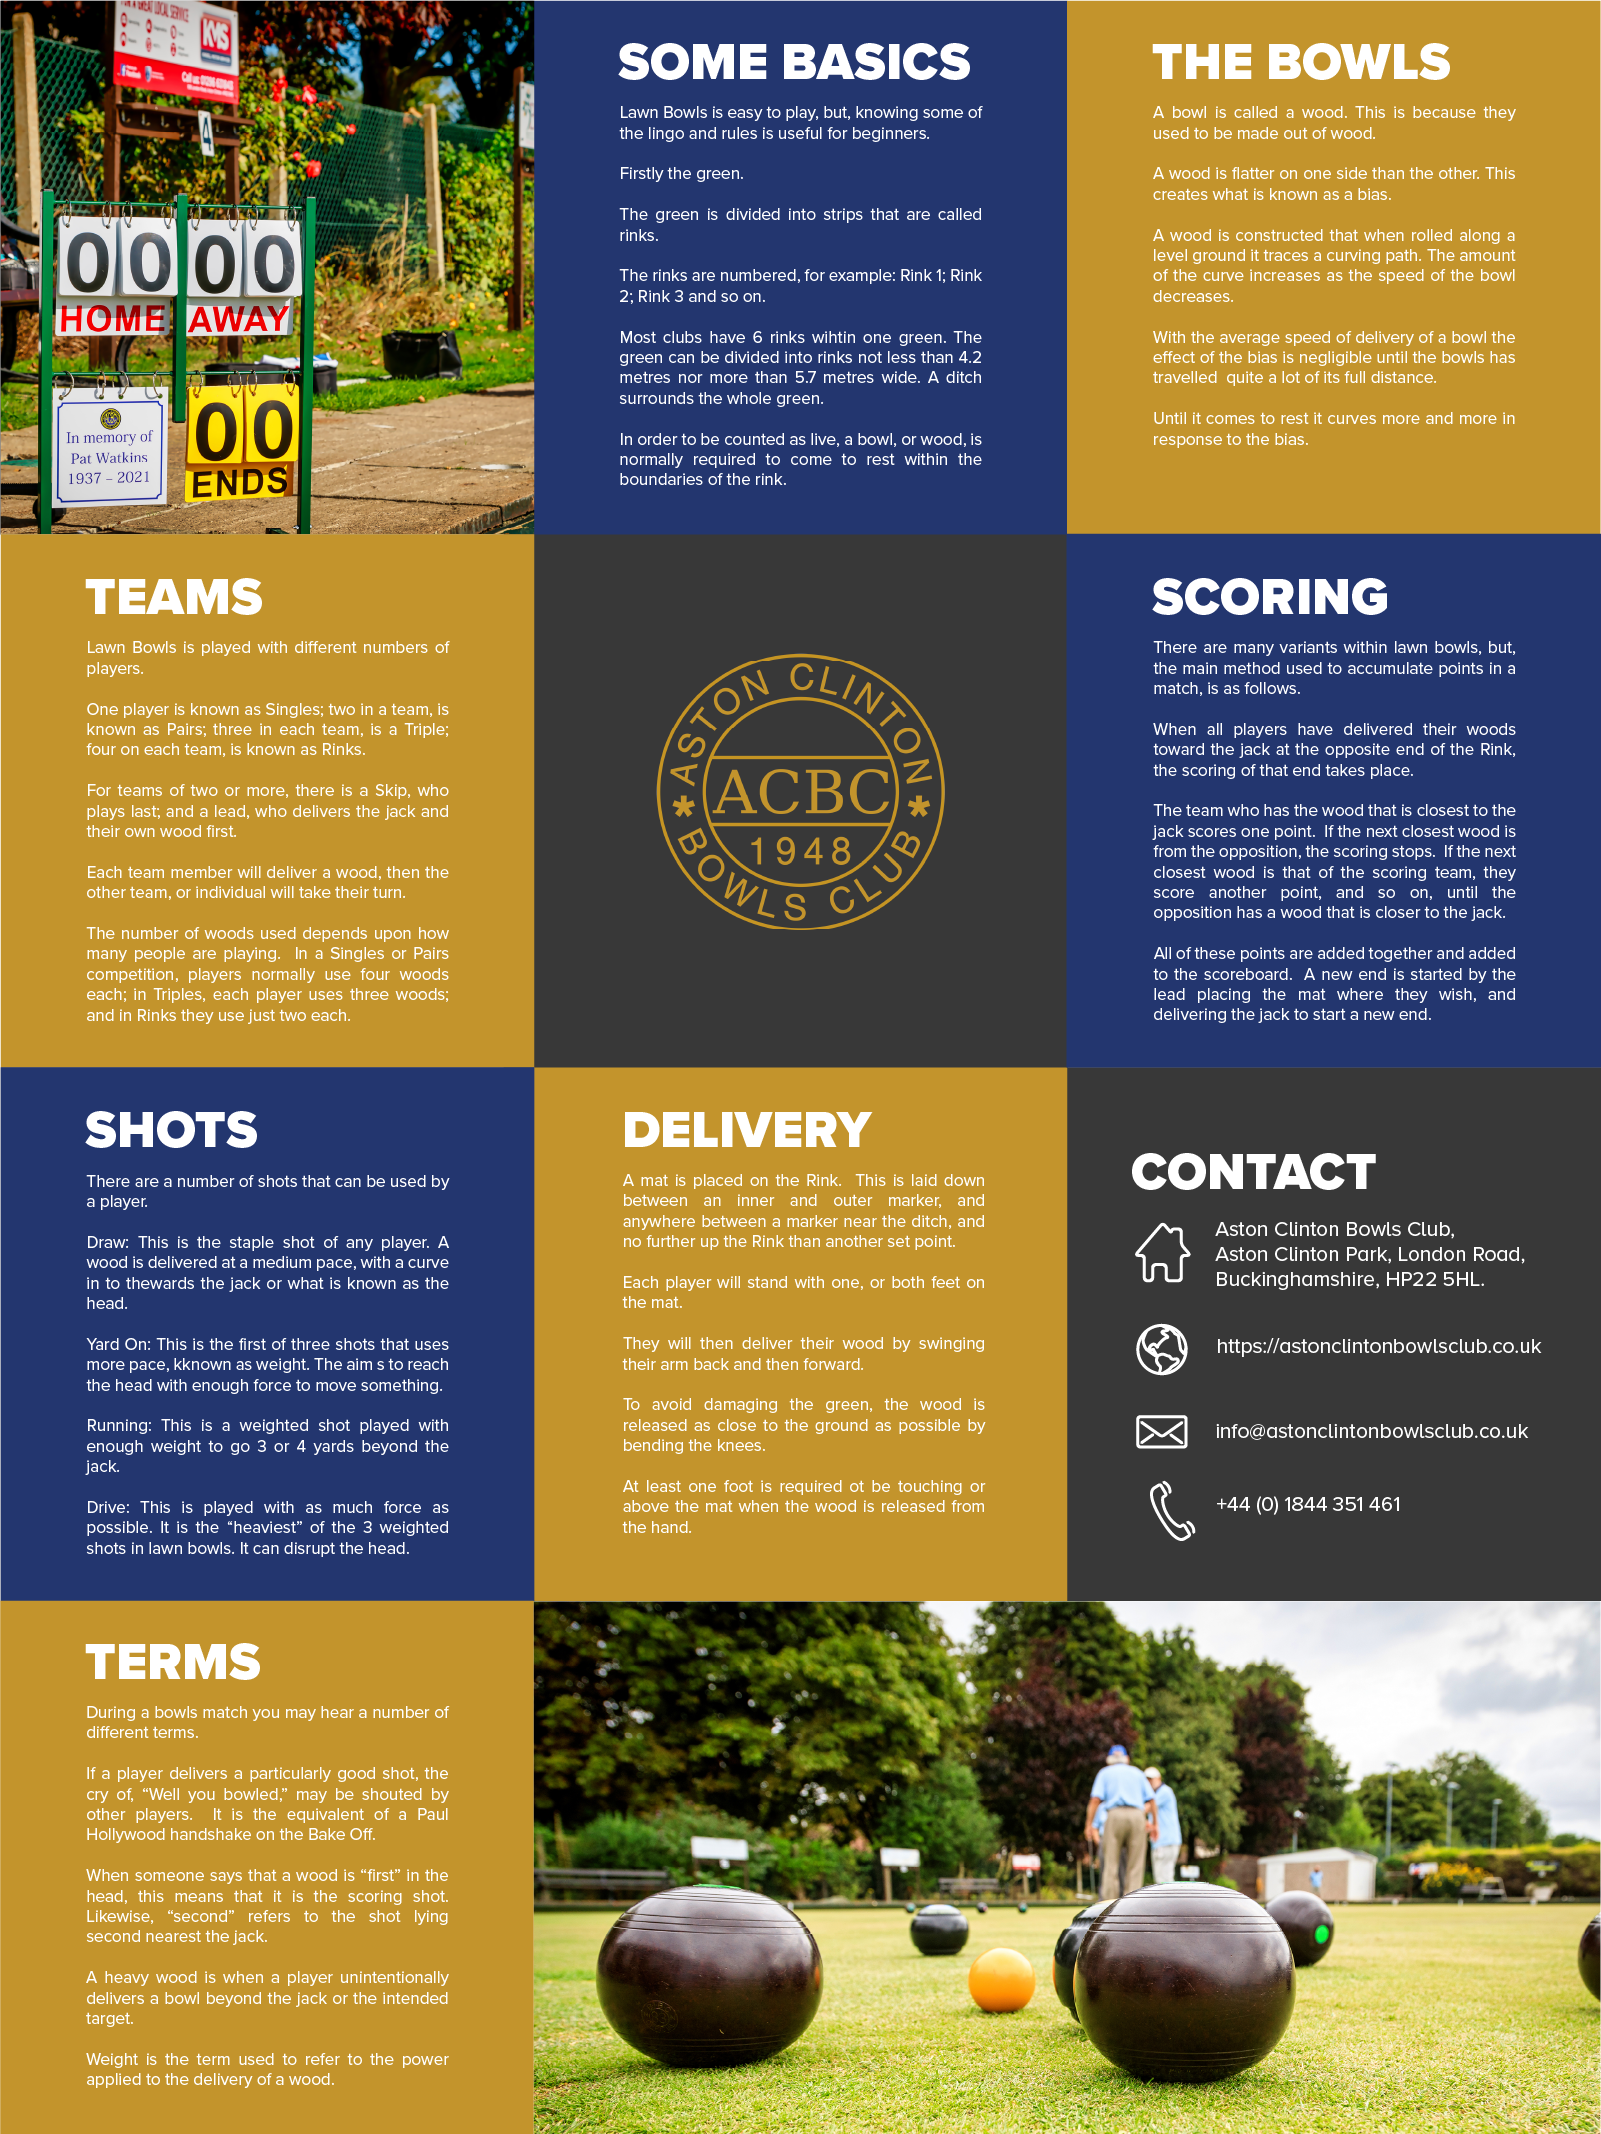 The rules of Lawn Bowls in England and an introduction to the sport in Aston Clinton Buckinghamshire